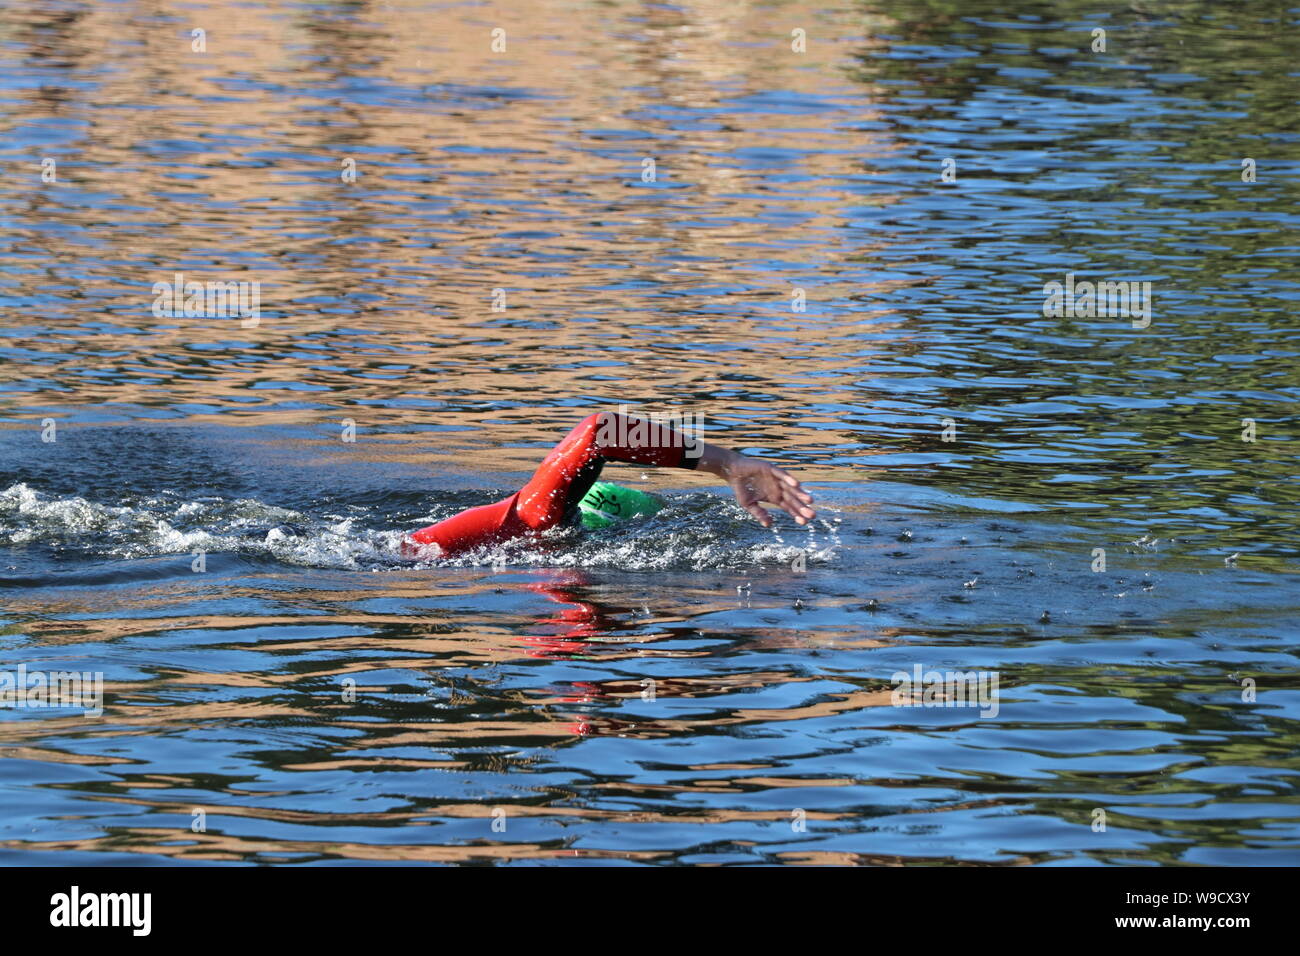 A swimmer taking a stroke in Evergreen Lake while competing in the Evergreen Sprint Triathlon Stock Photo